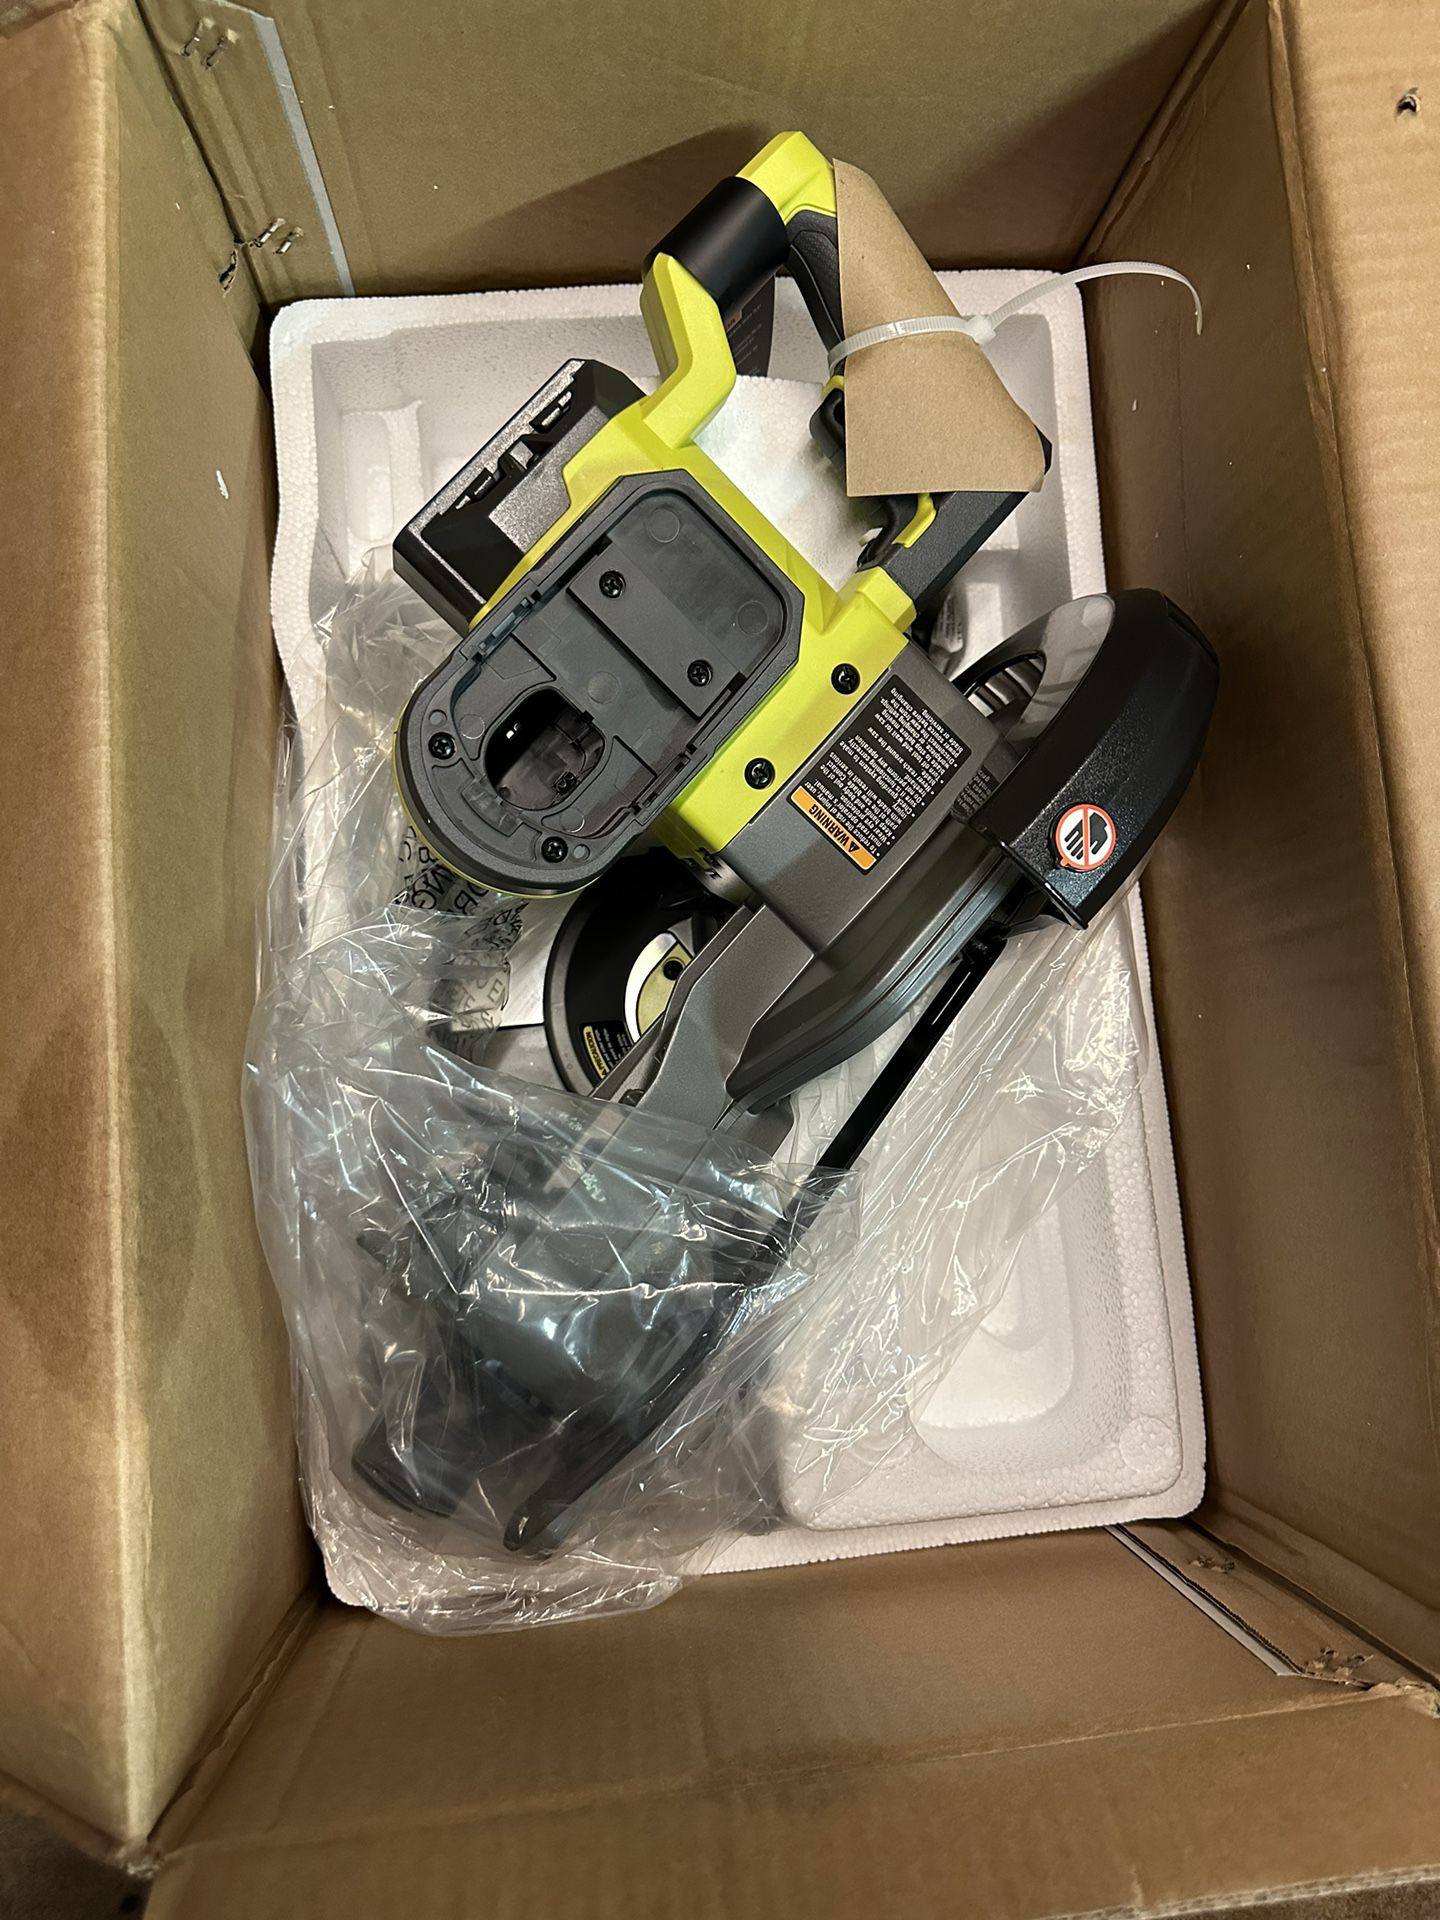 RYOBI ONE+ 18V Cordless 7-1/4 in. Compound Miter Saw (Tool Only)